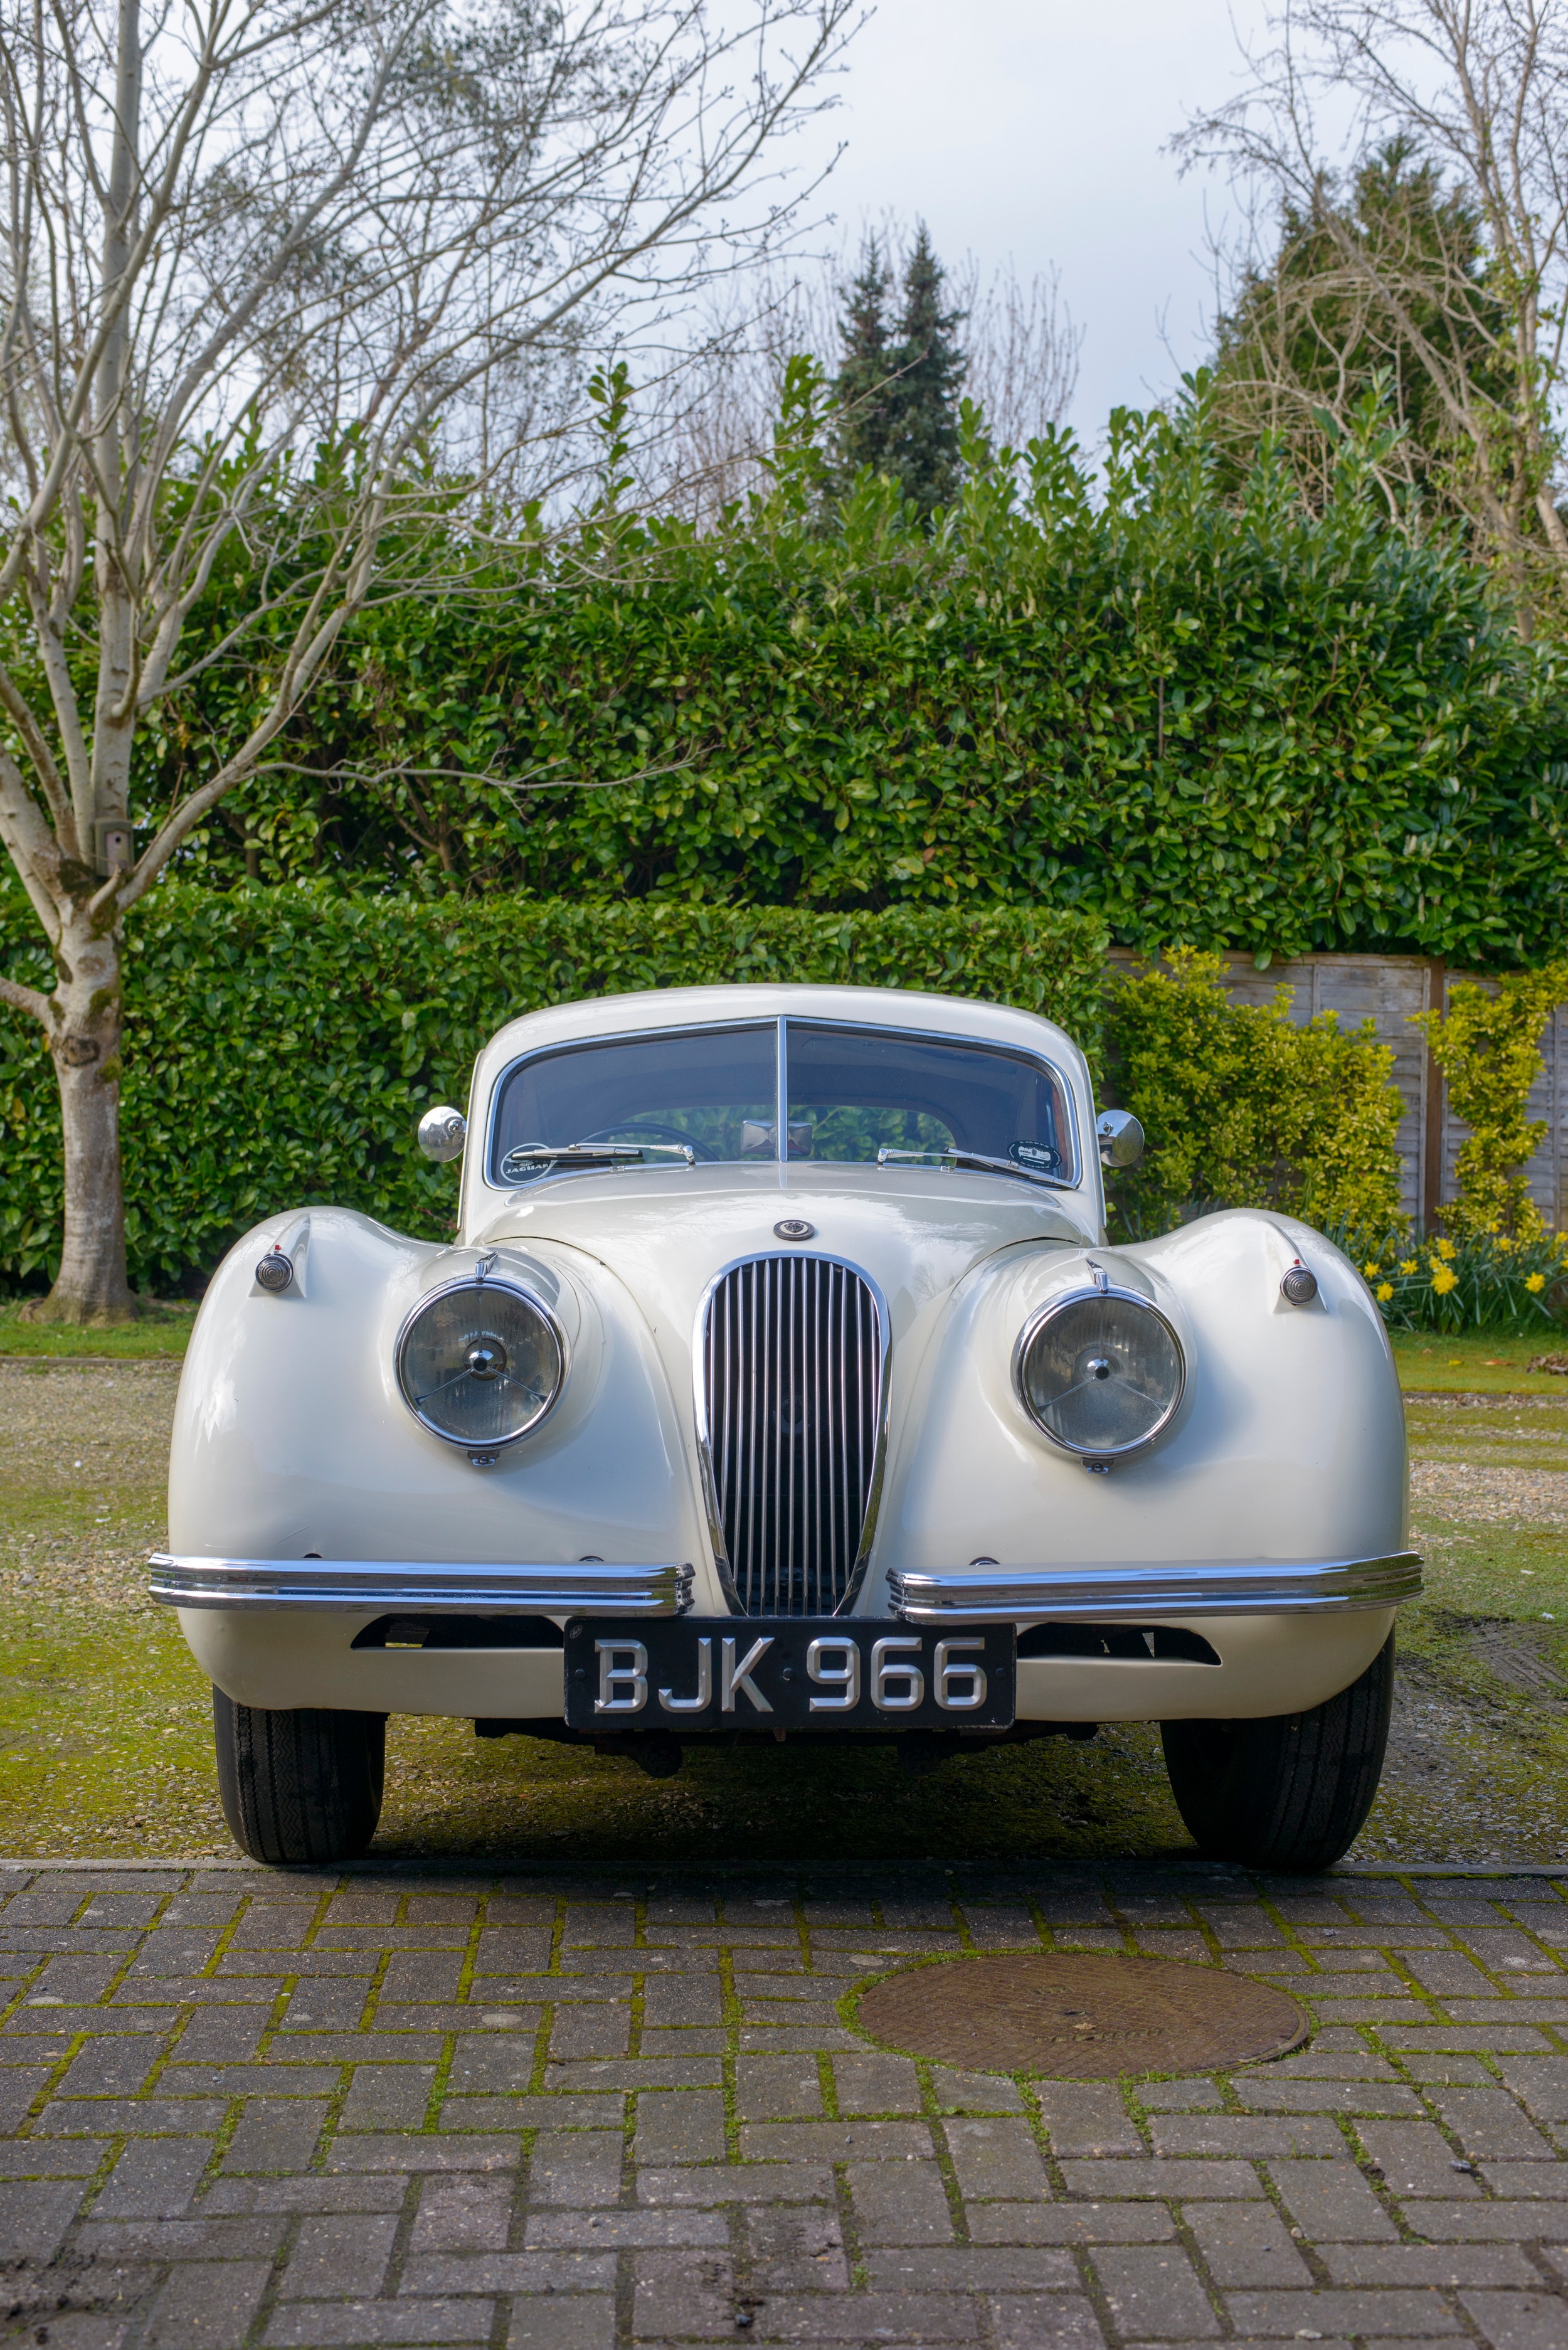 1954 JAGUAR XK120 FIXED HEAD COUPE Registration Number: BJK 966 Chassis Number: 669158 Recorded - Image 3 of 61